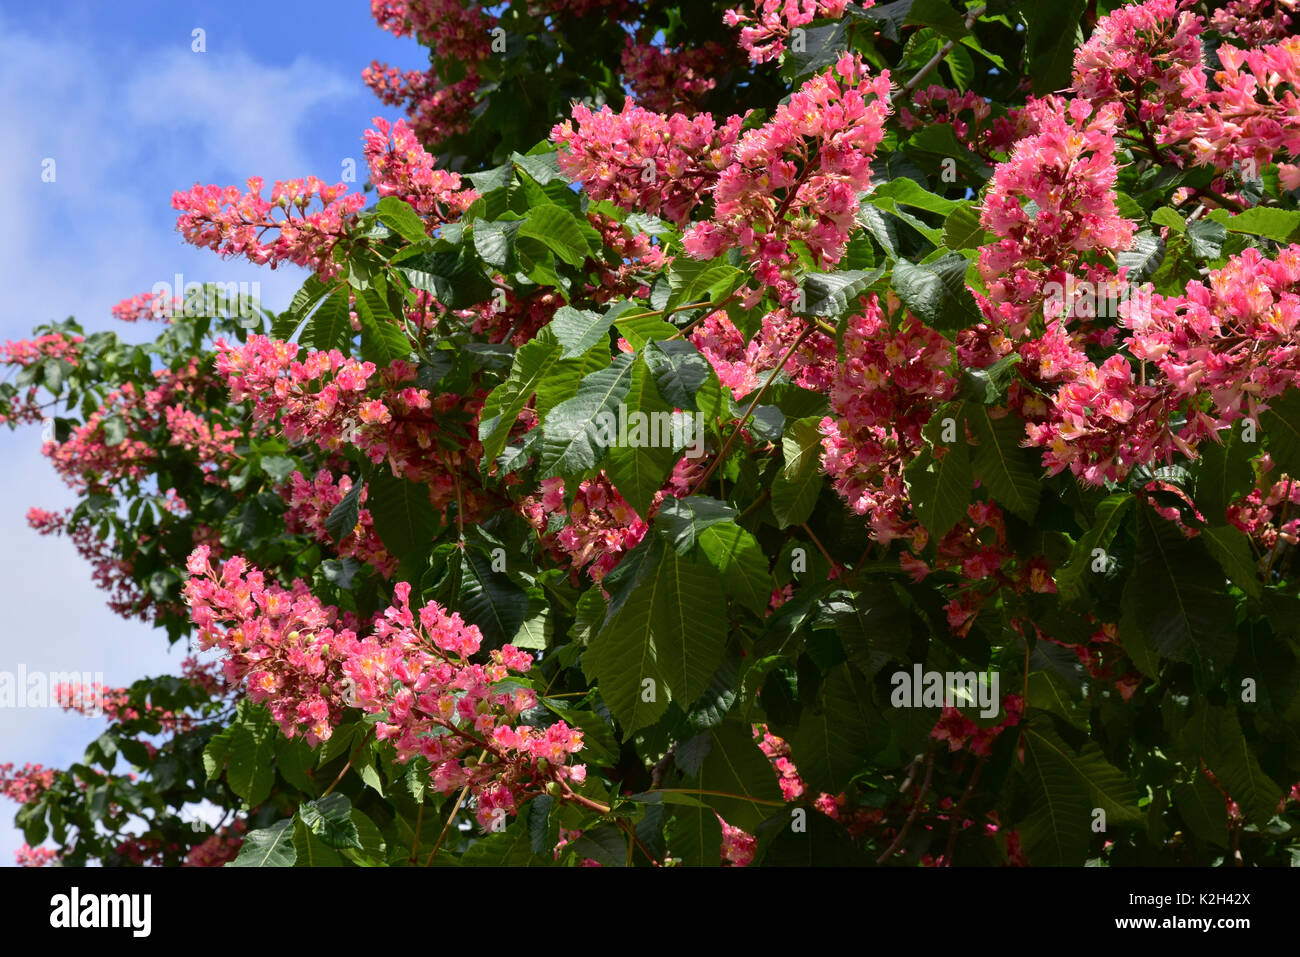 Red horse-chestnut (Aesculus x carnea), flowering twigs Stock Photo